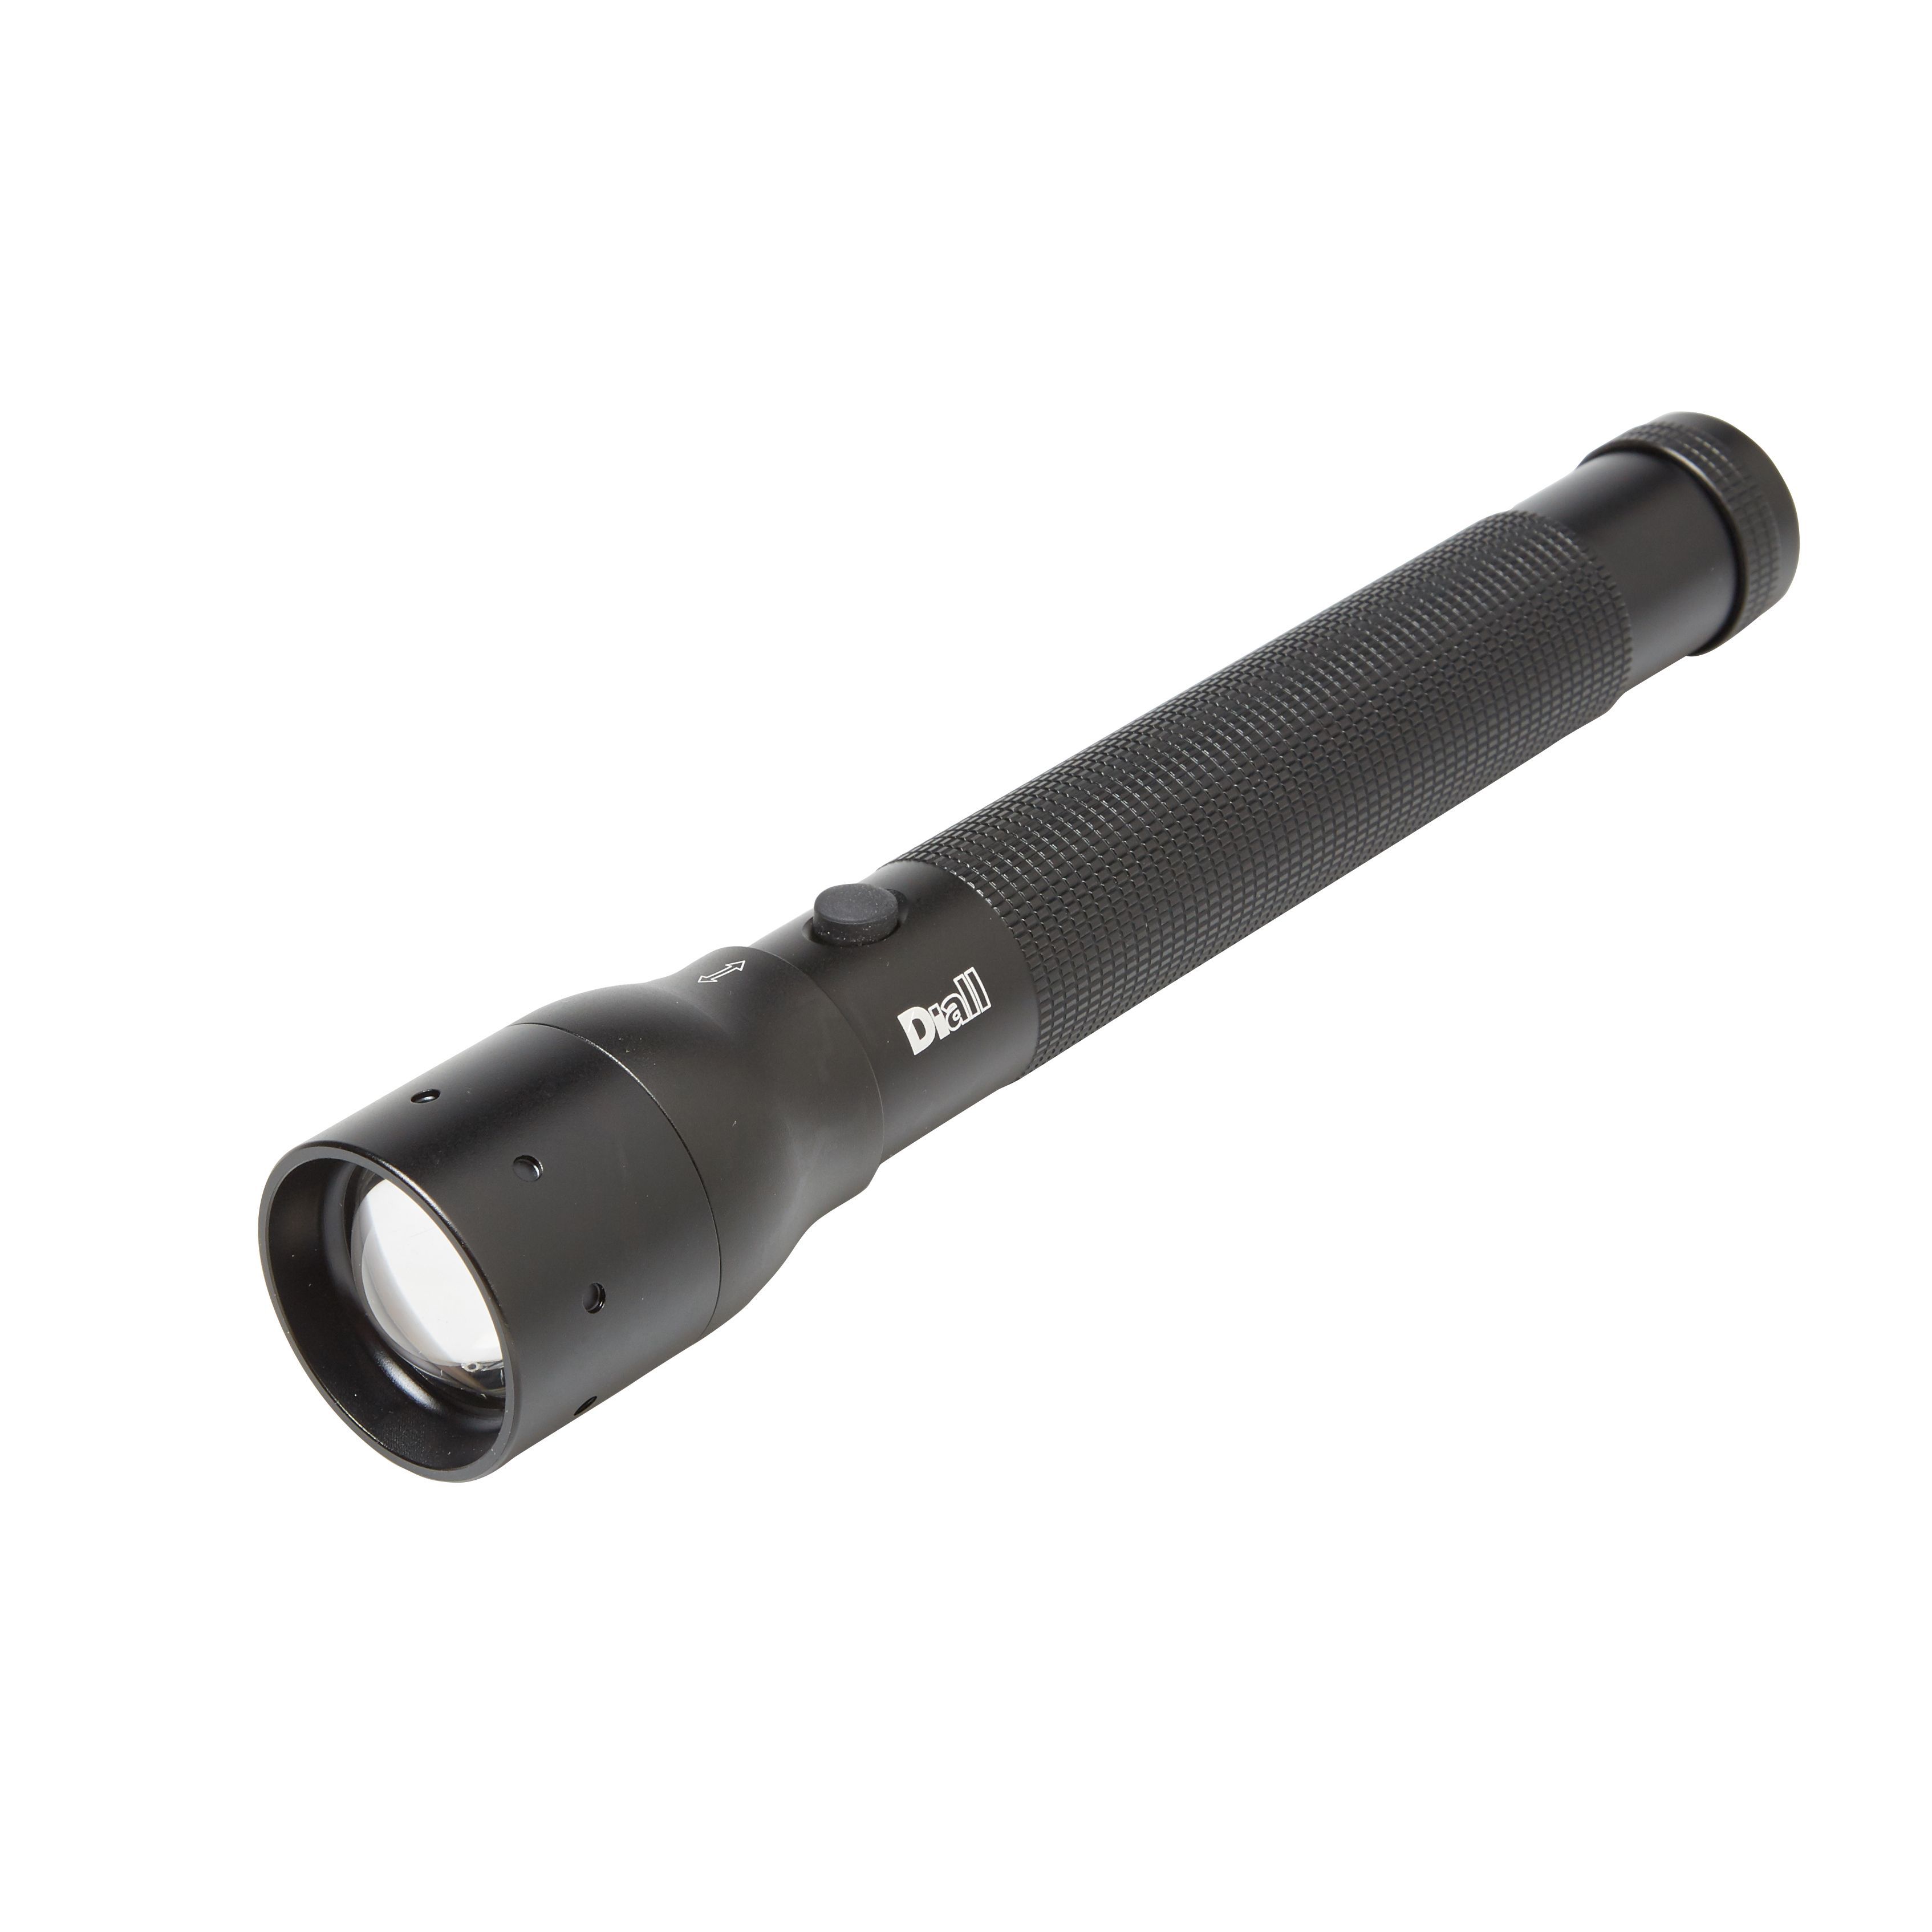 Diall Pro Black 180Lm Led Battery-Powered Torch